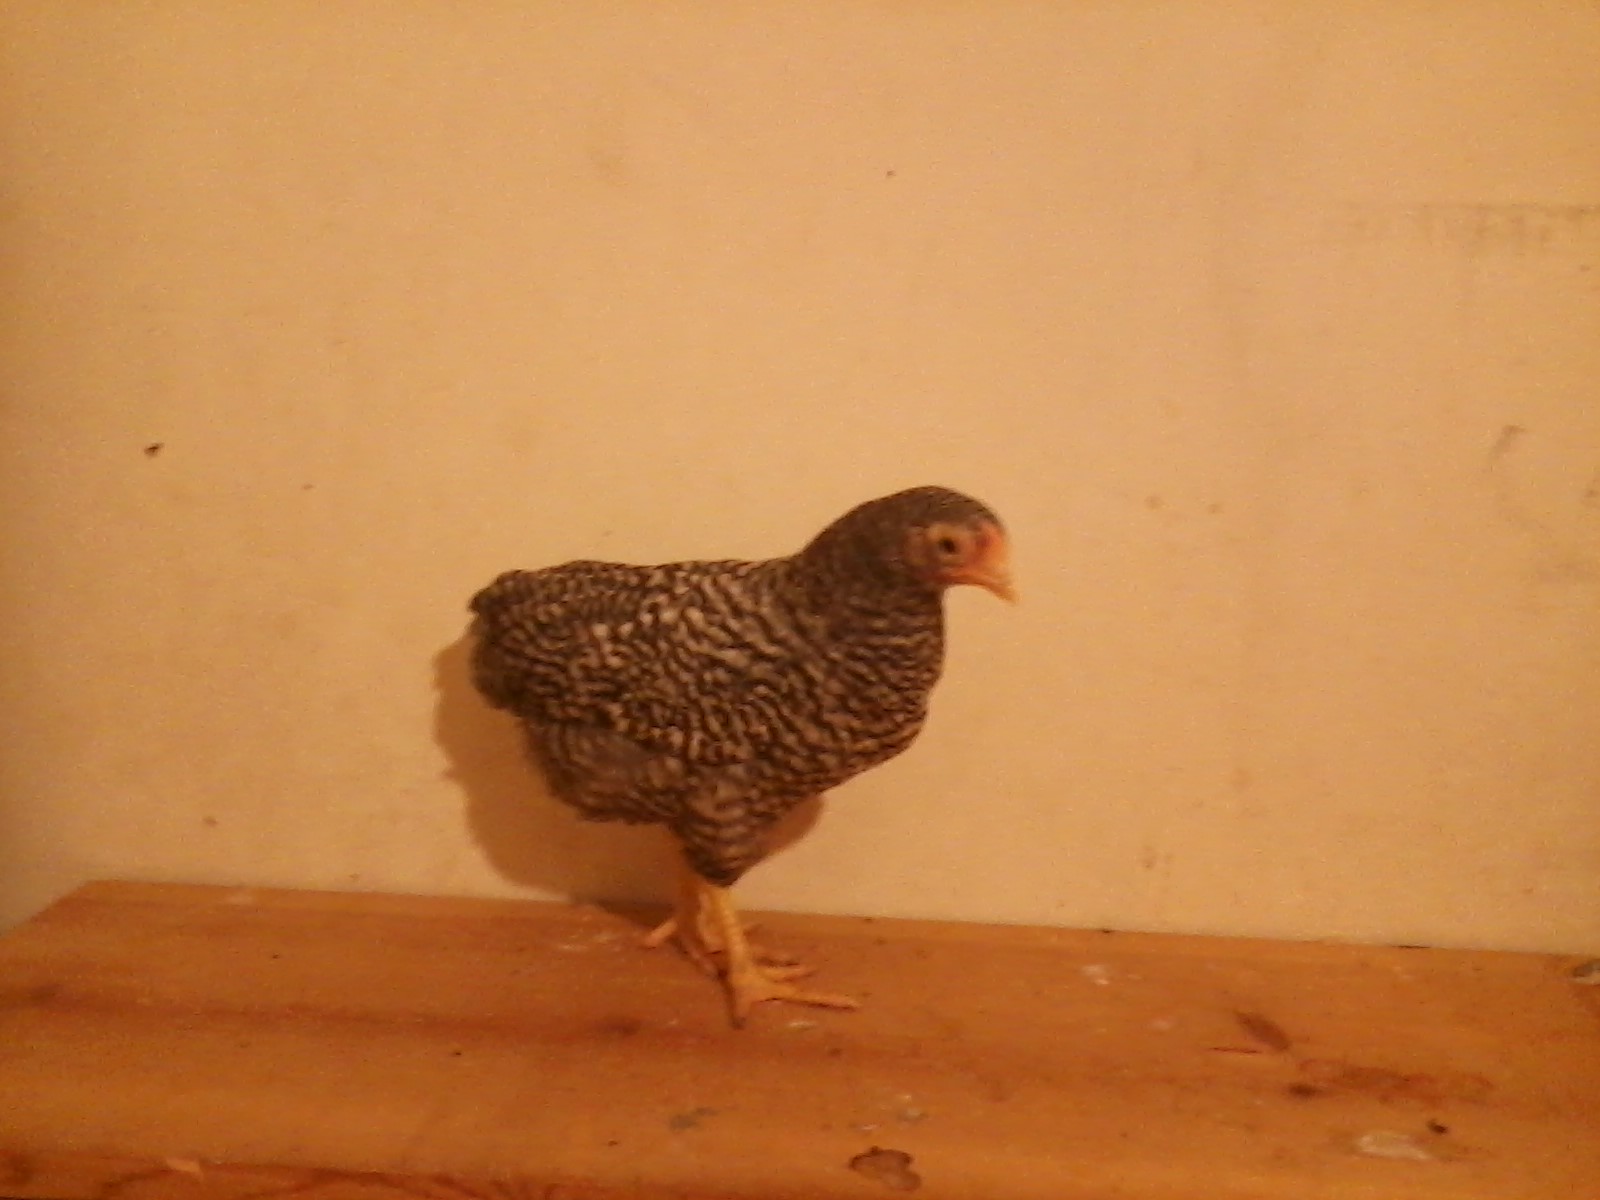 Freda, a Dominique pullet approximately 6 weeks old.